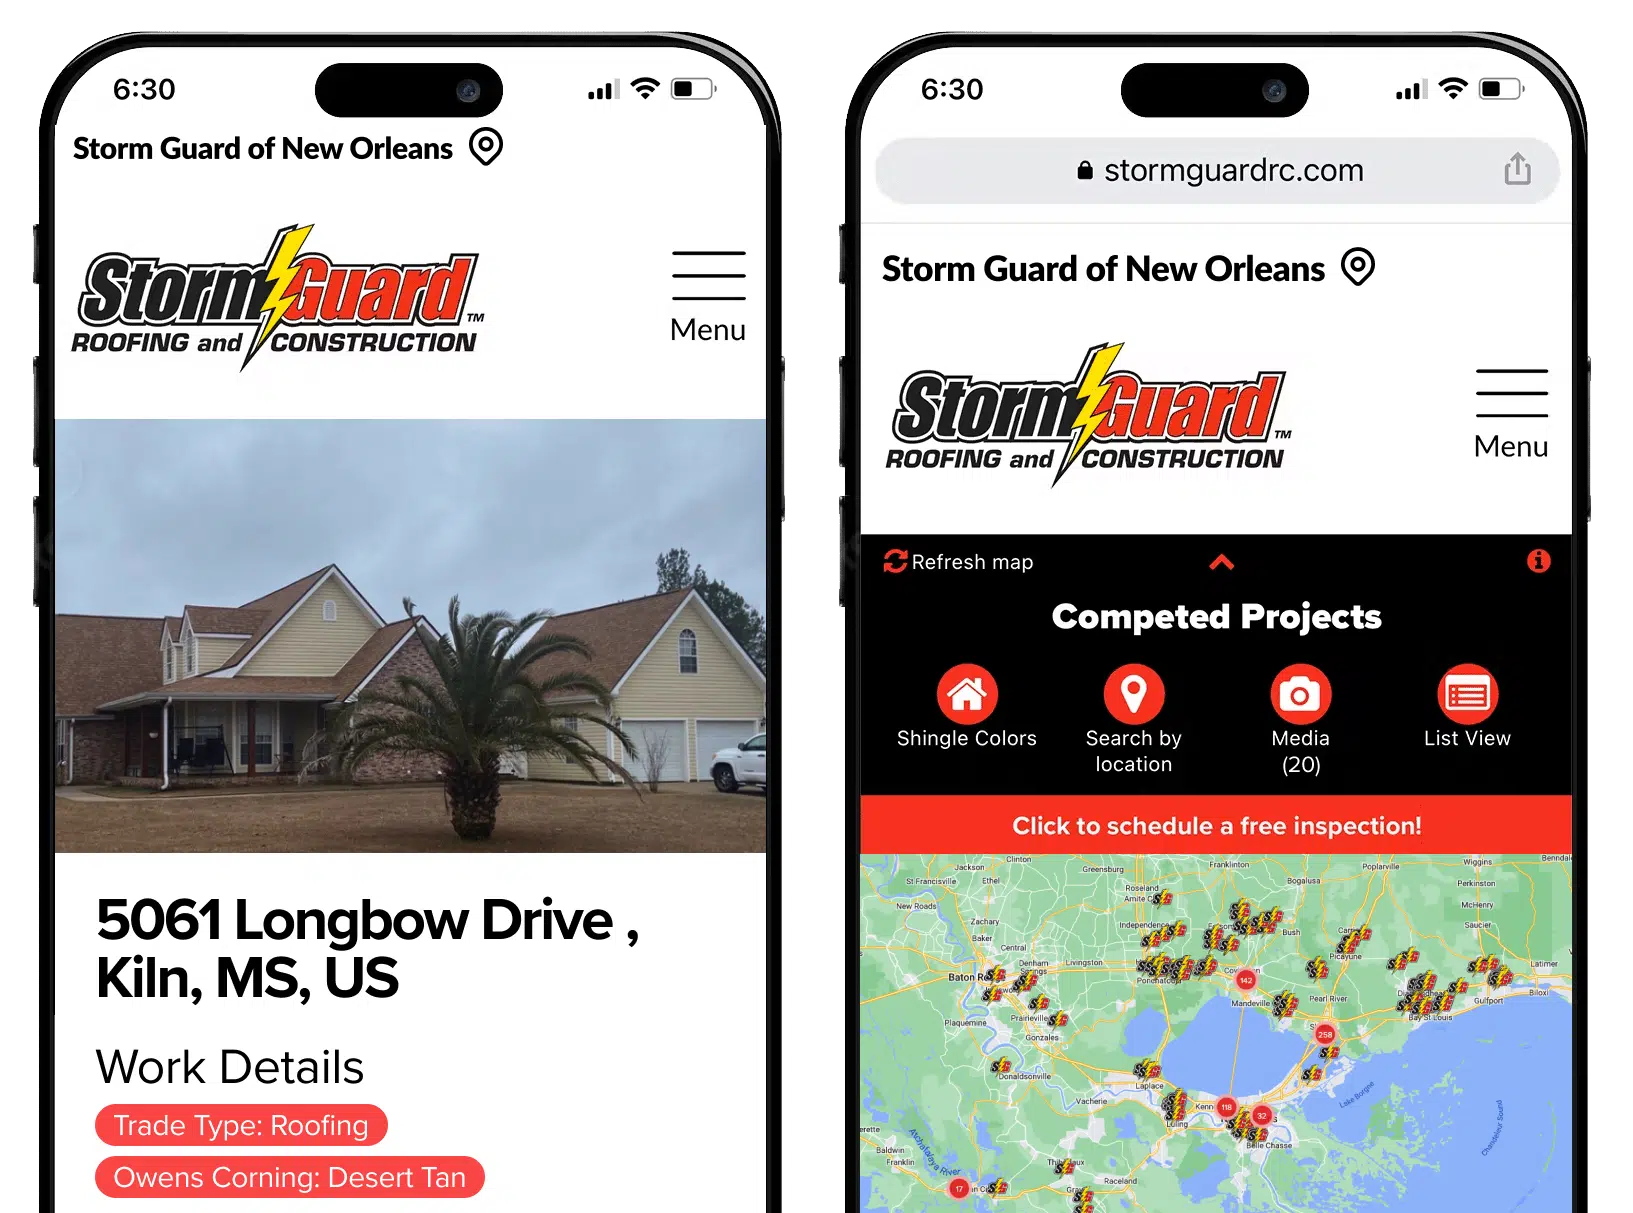 Storm Guard of New Orleans, LA roofing projects sample